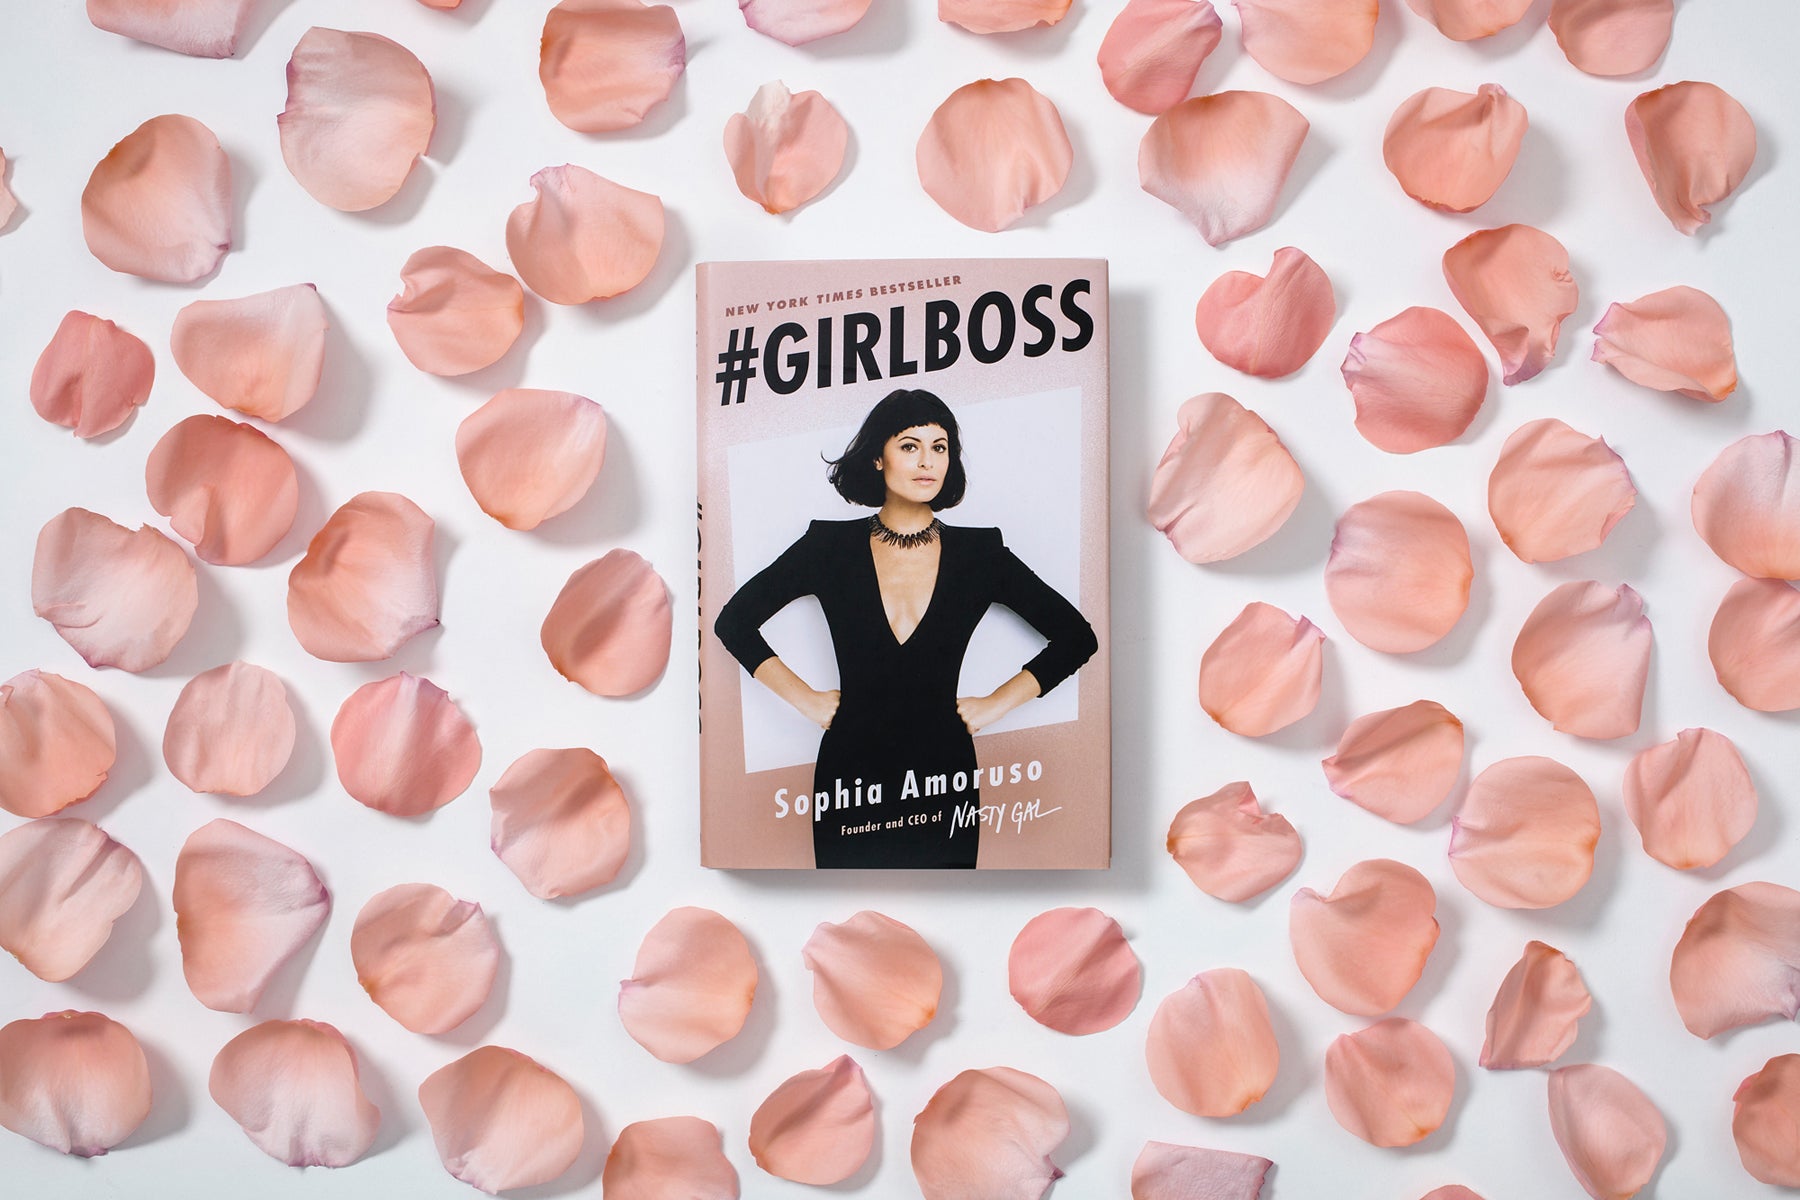 #Girlboss, a book by Sophia Amoruso, surrounded by pink rose petals.